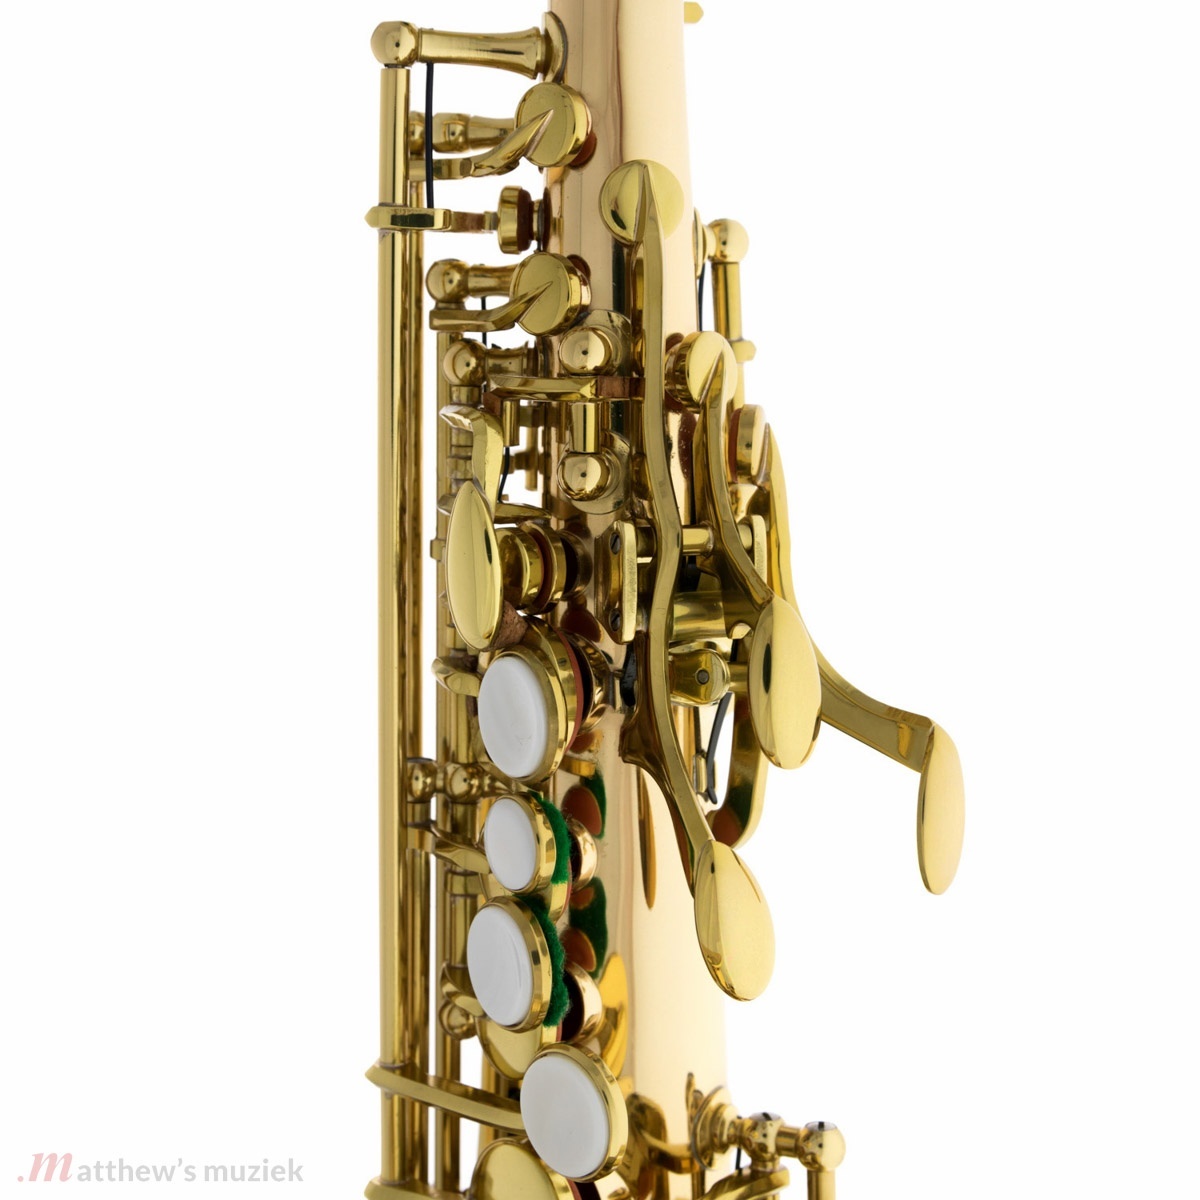 Magenta Winds Curved Soprano Sax - CSS 1G